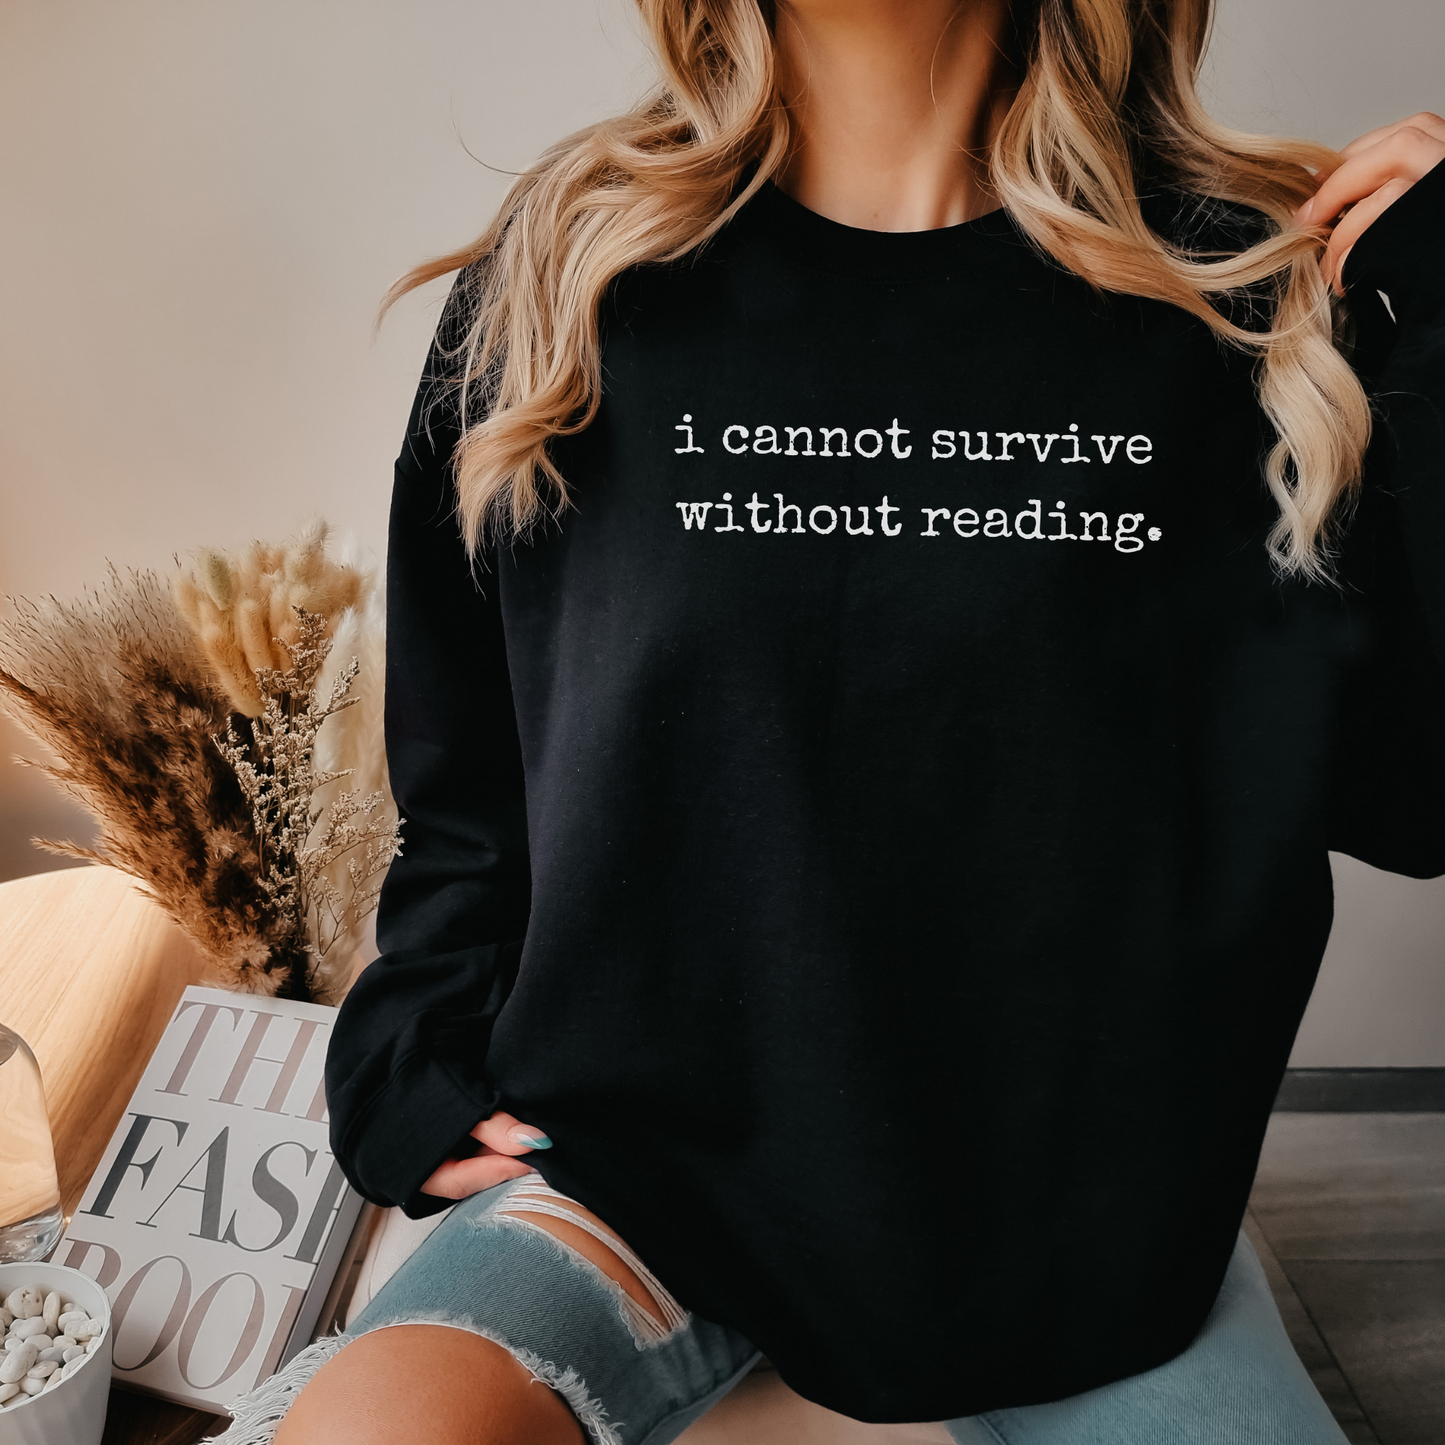 I Cannot Live Without Reading Oversize Sweatshirt Gift for Her Him Book Lover Bookworm Read More Books Banned Books Shirt Hoodie